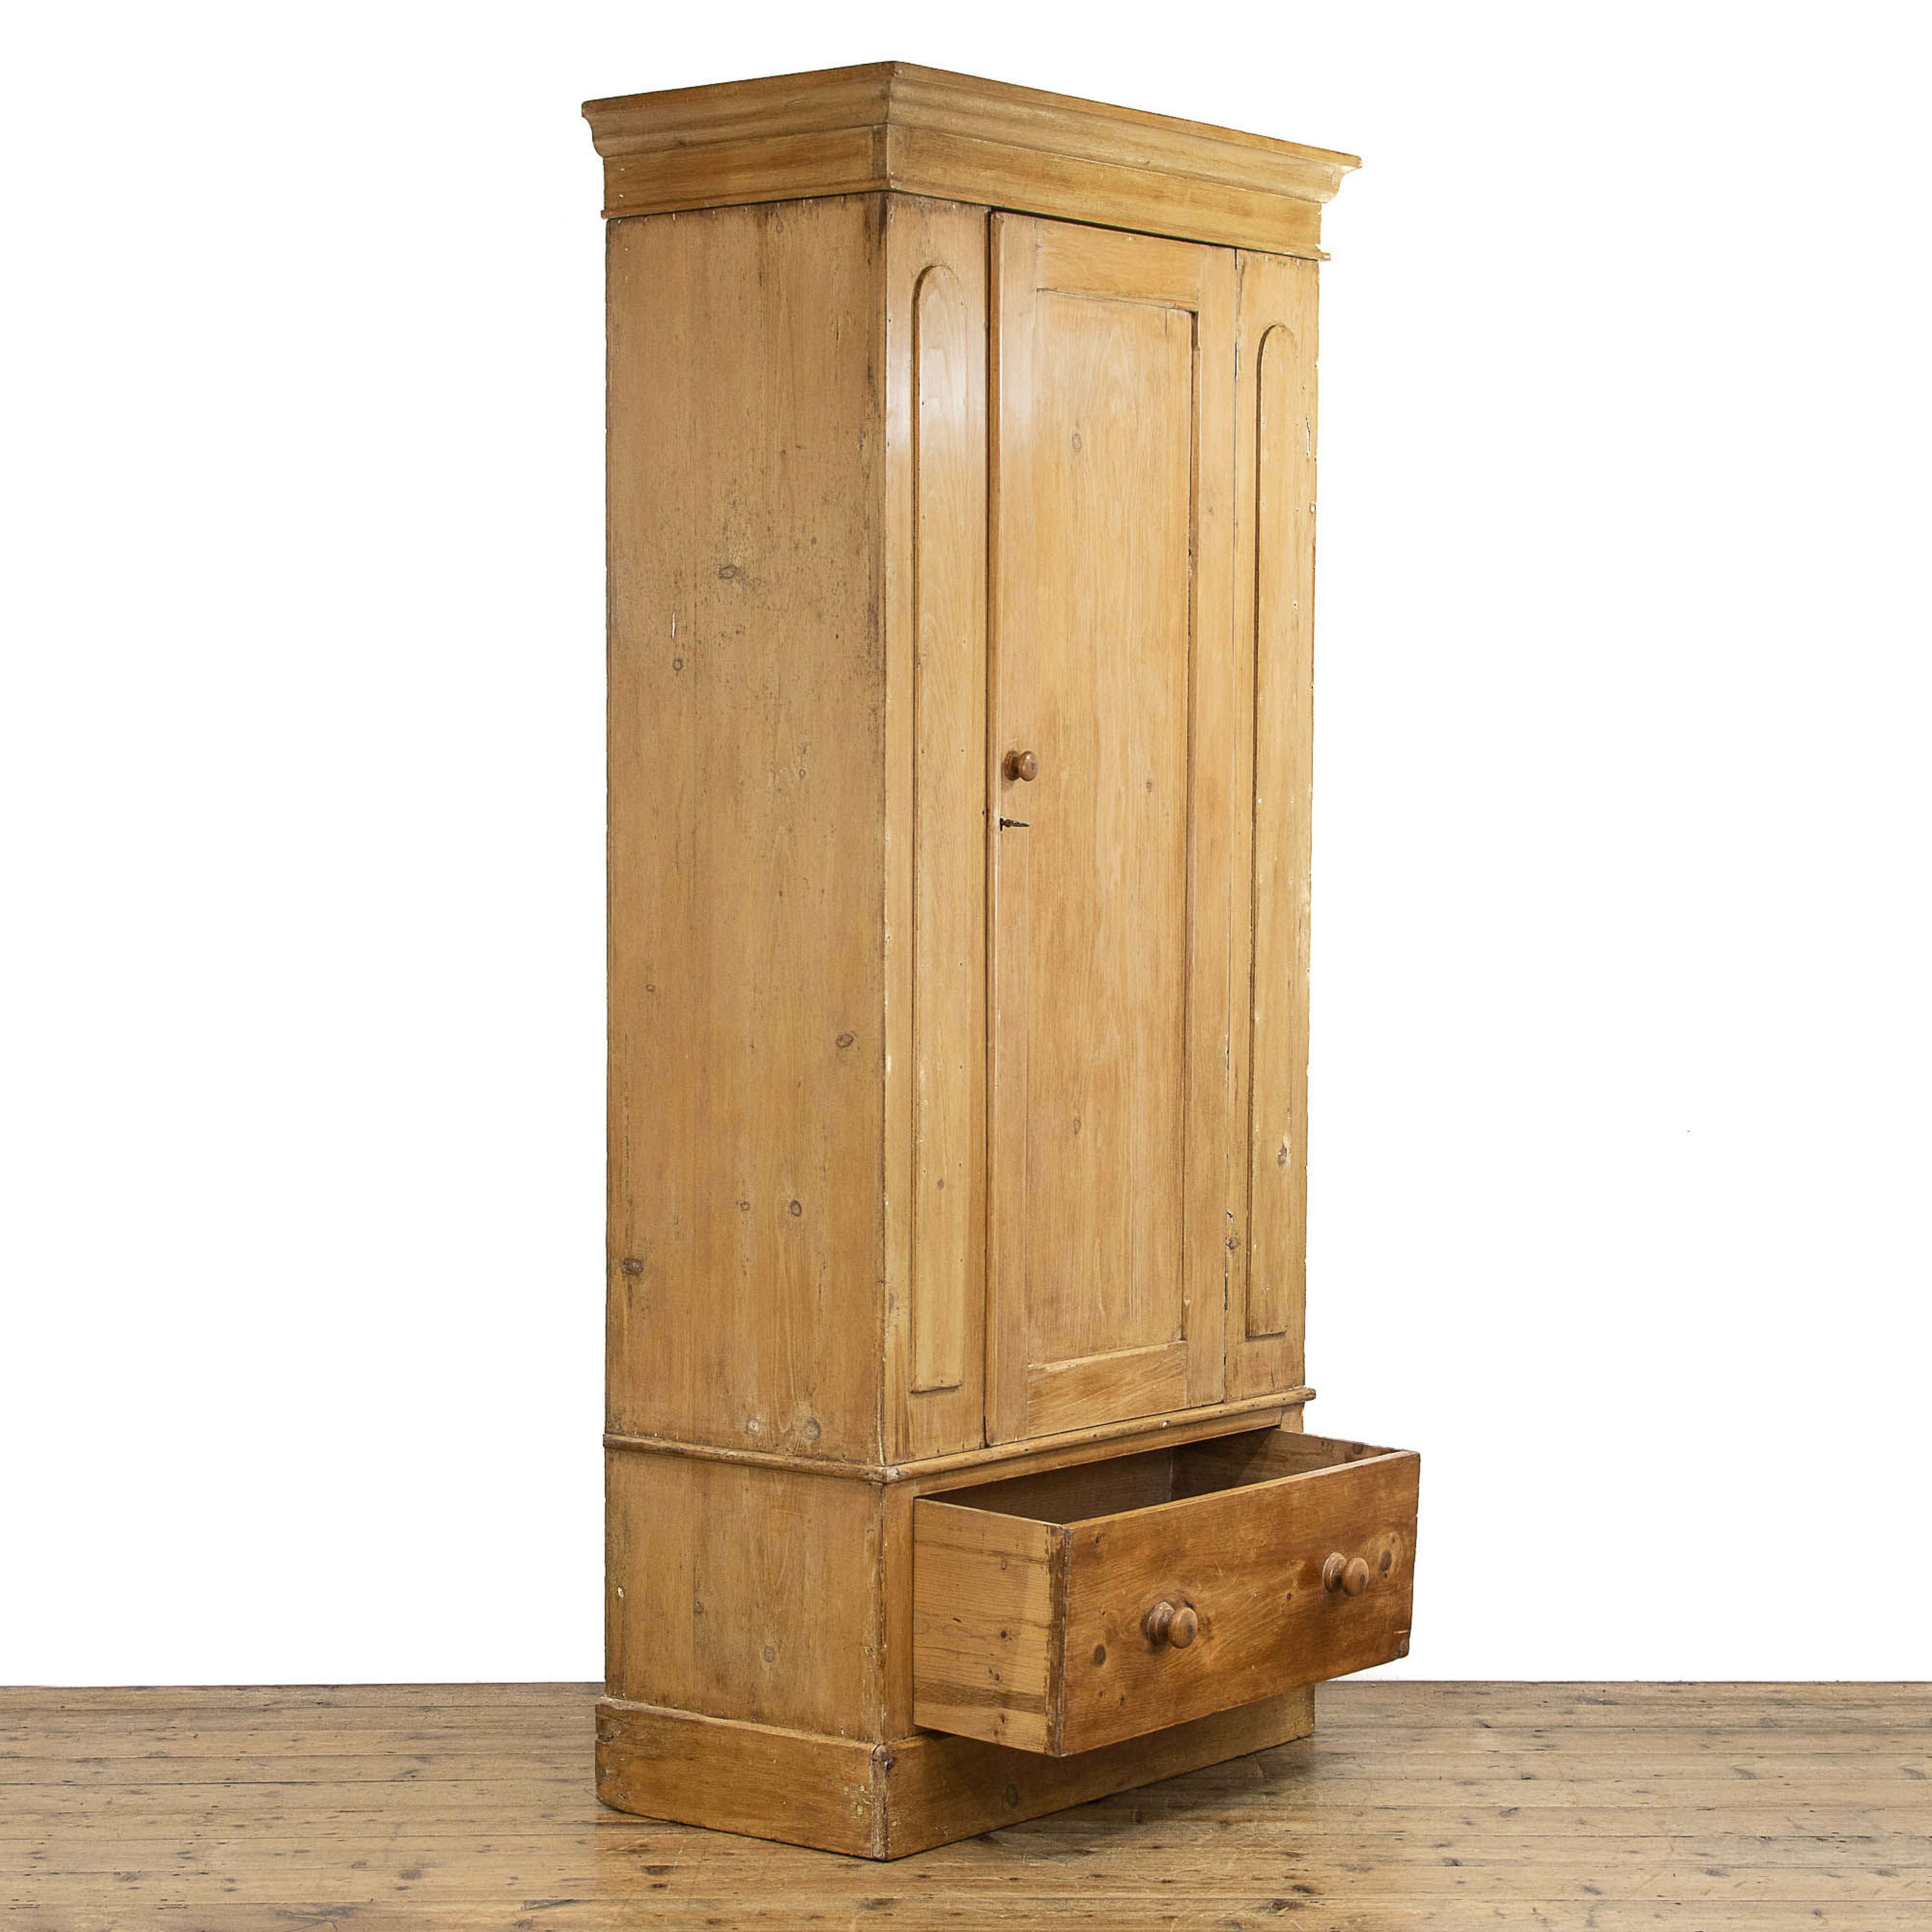 Victorian Stripped Pine Single Wardrobe In Antique Wardrobes & Armoires Pertaining To Pine Single Wardrobes (View 5 of 15)